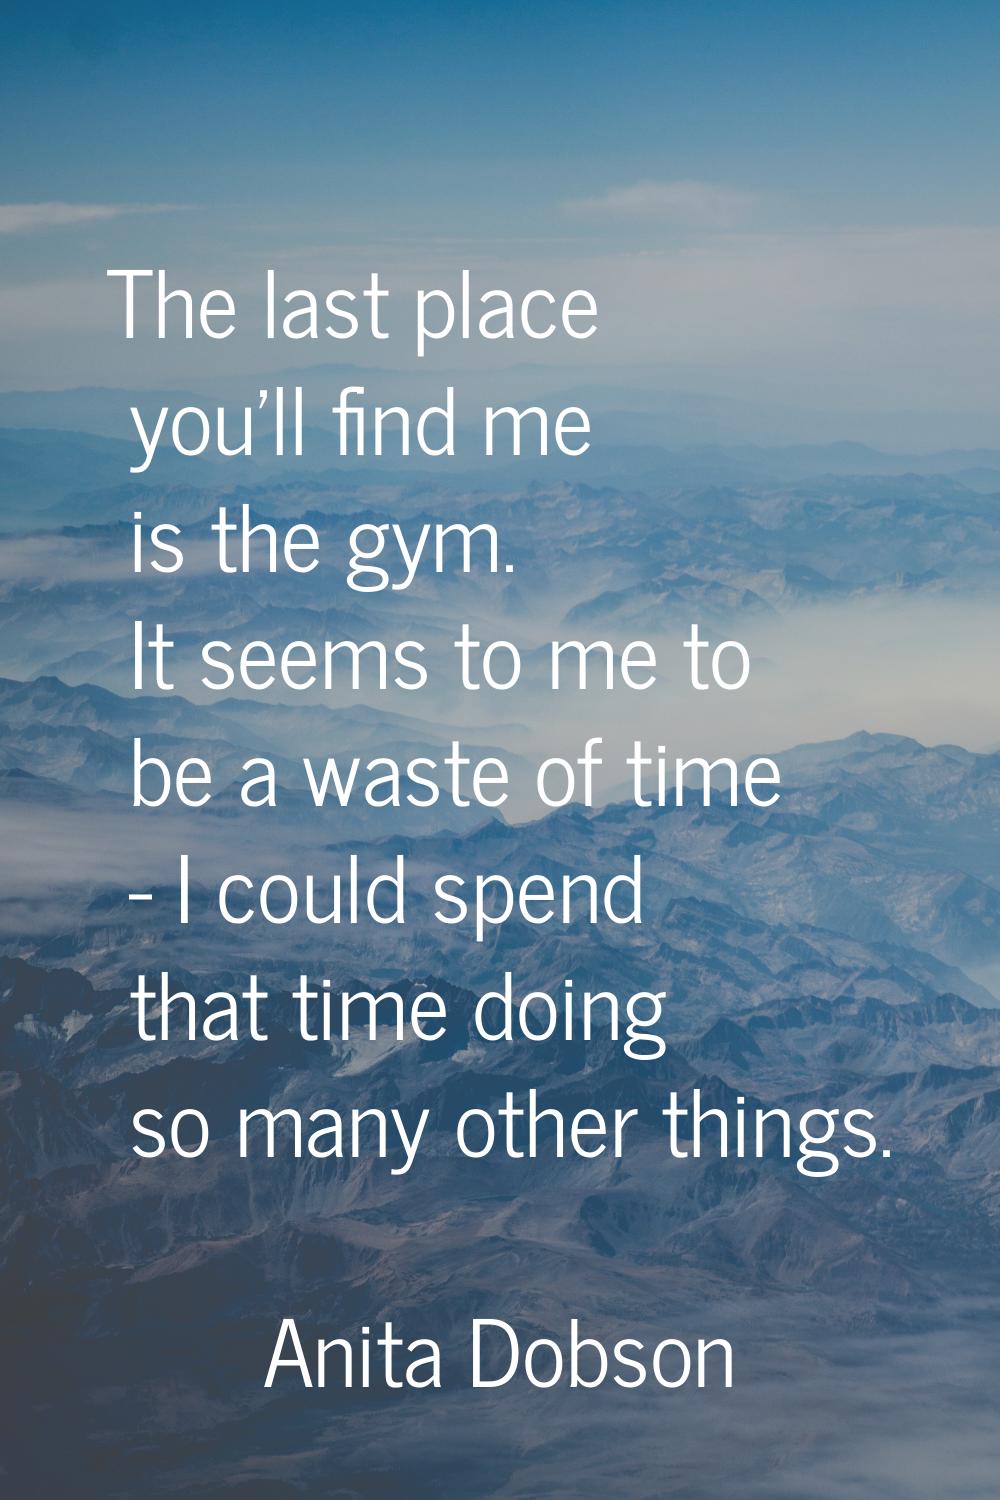 The last place you'll find me is the gym. It seems to me to be a waste of time - I could spend that